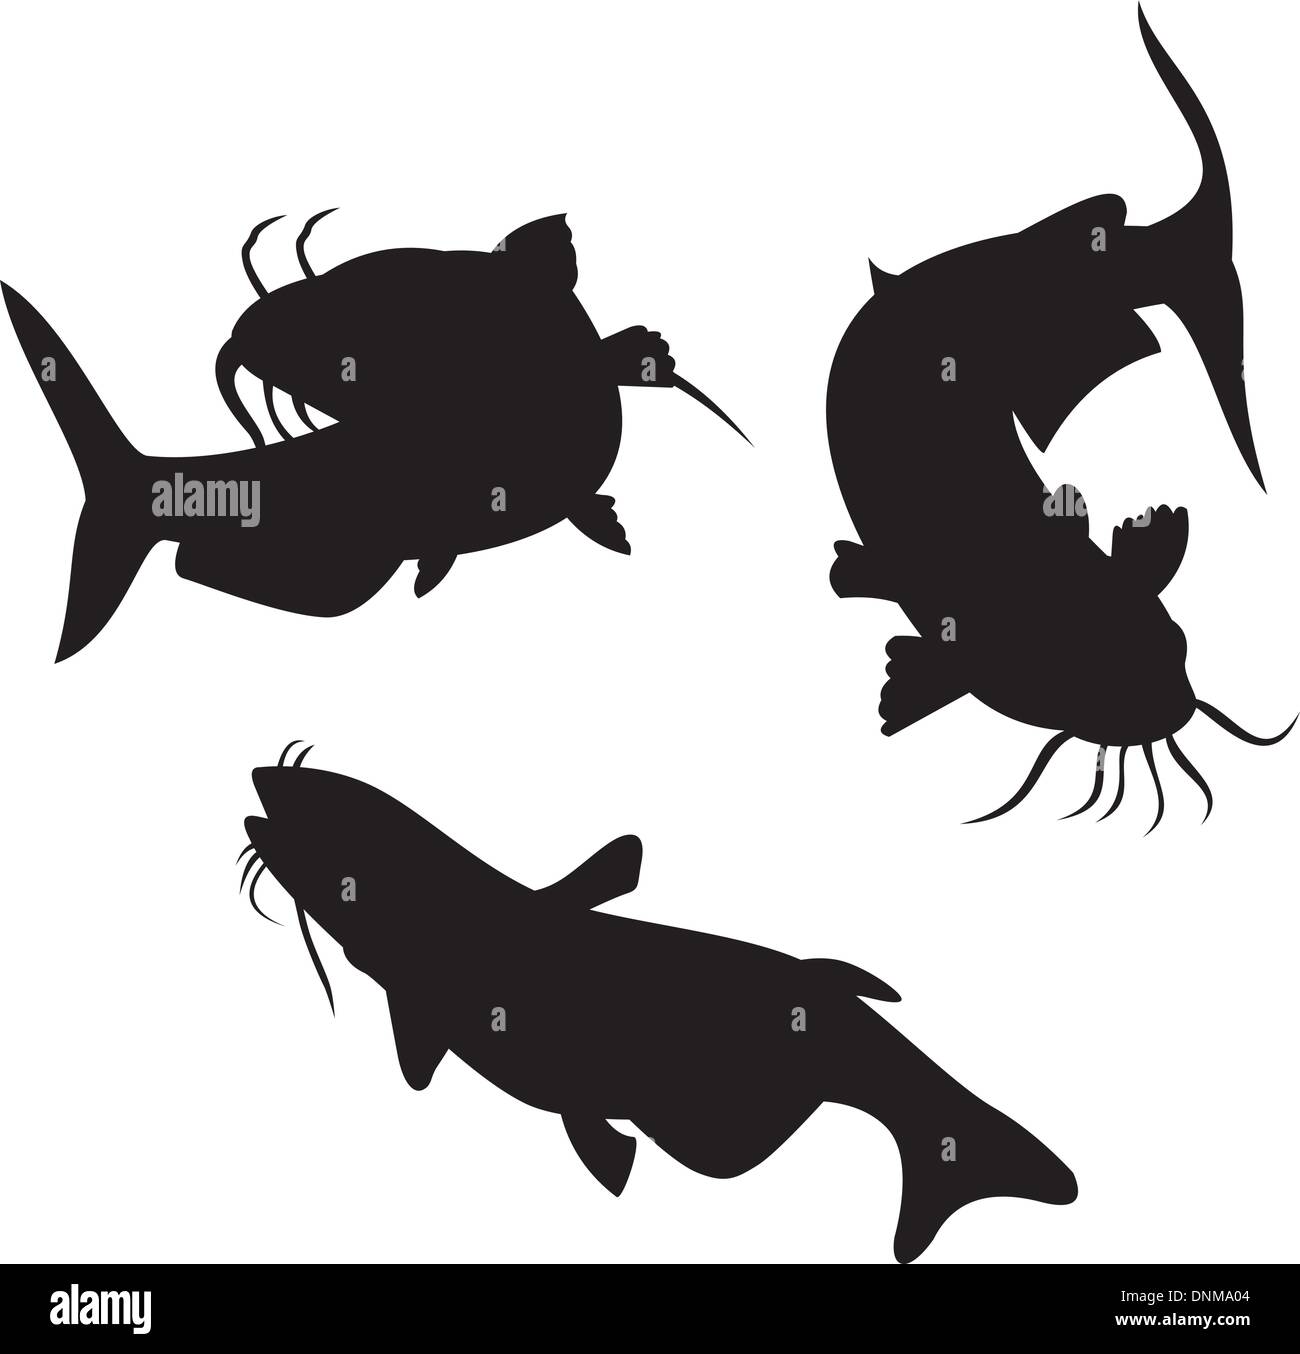 Illustration of a catfish silhouette done in retro style. Stock Vector